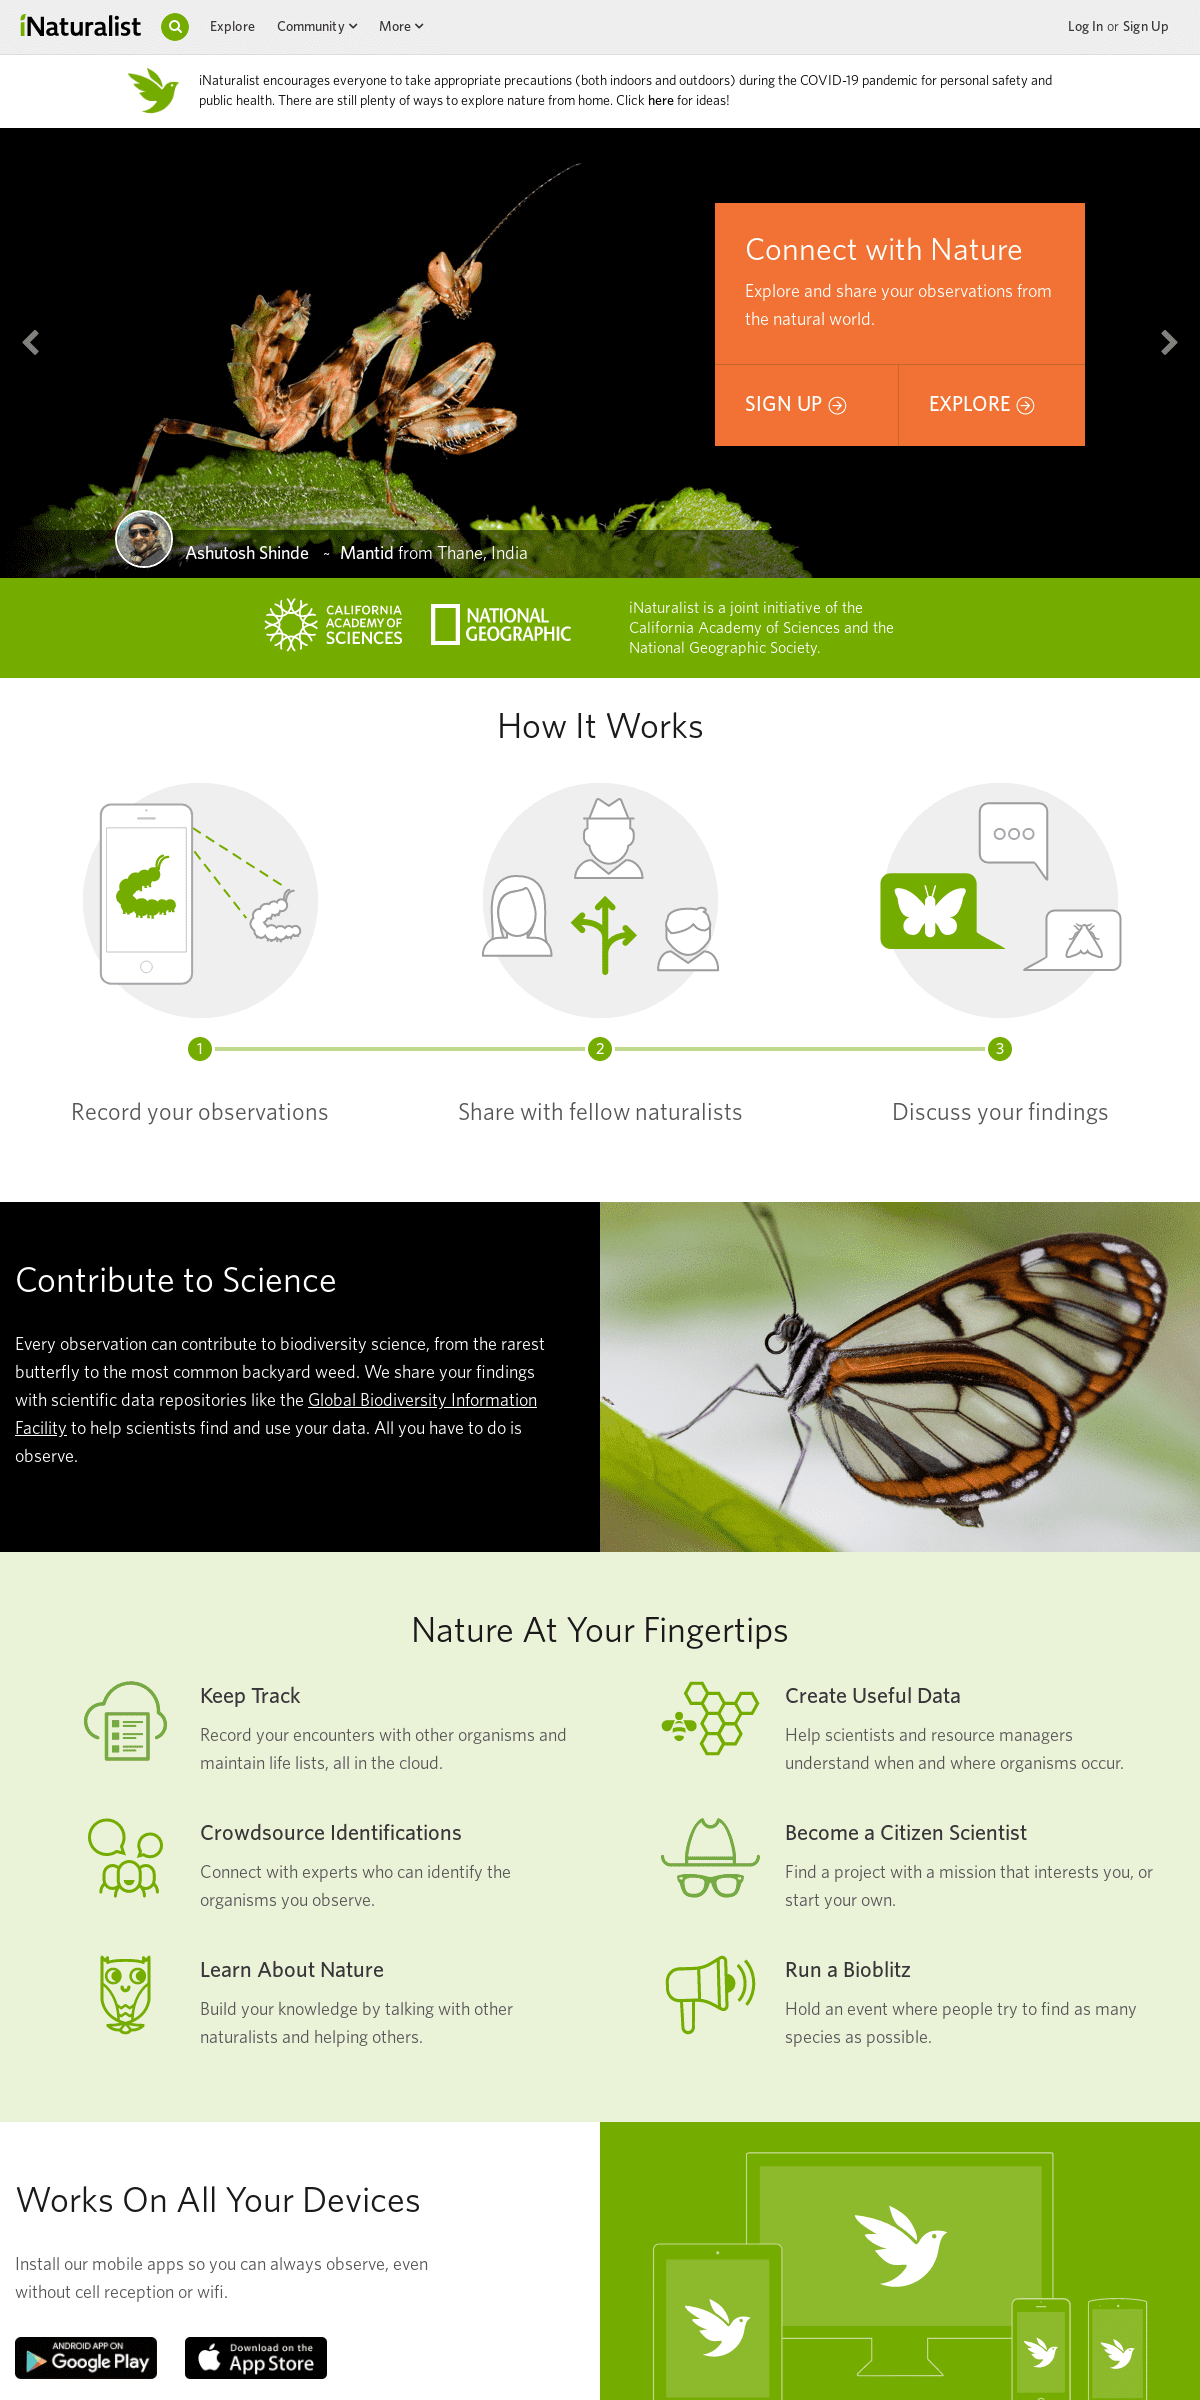 A complete backup of inaturalist.org